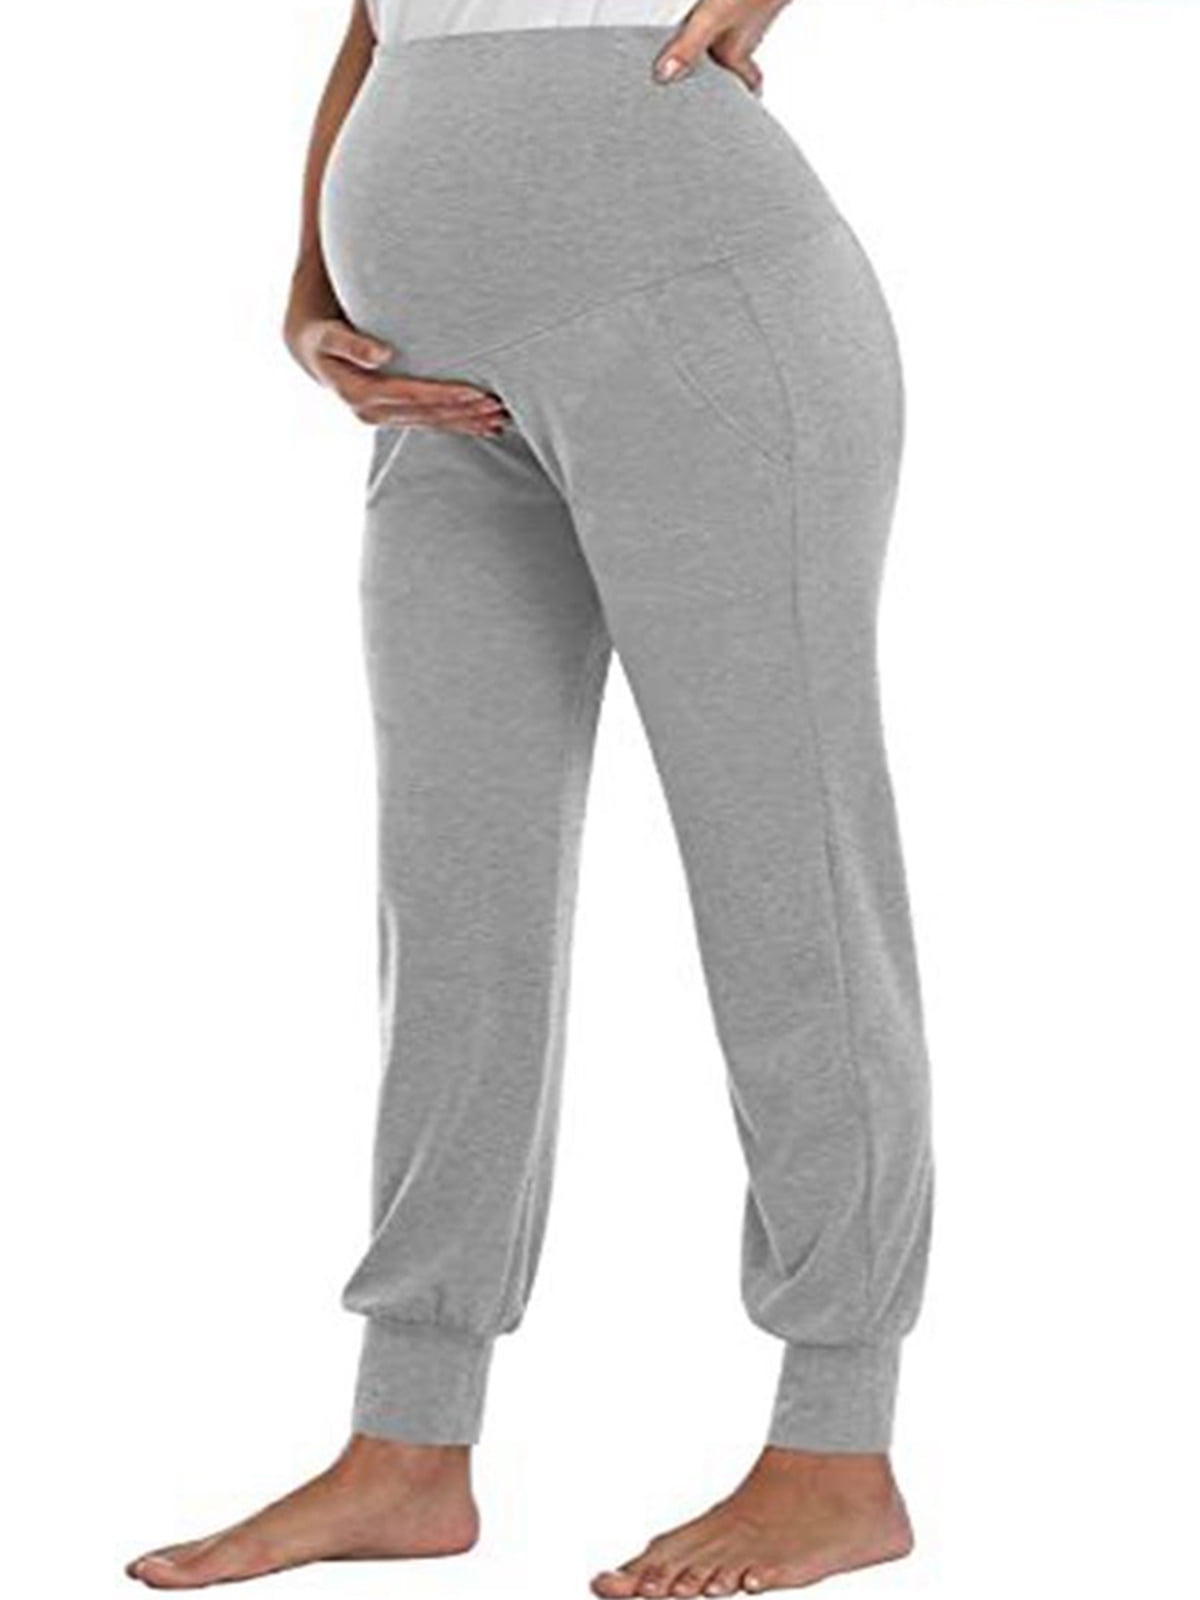 Pregnancy Lounge/Pajama/Pj Sweatpants Women Maternity Jogger Pants Over The Belly with Pocket